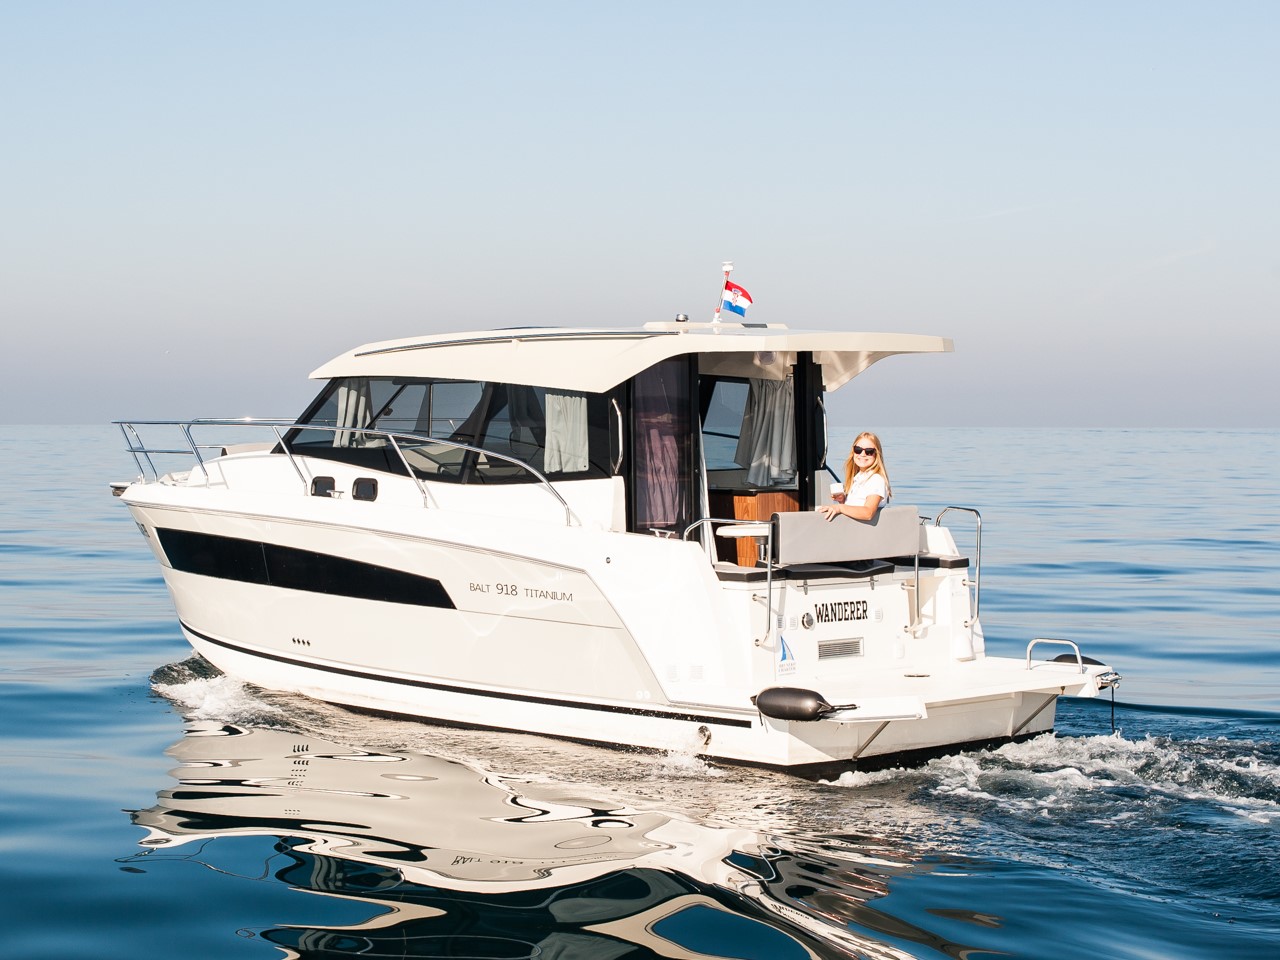 Balt 918 Titanium - Discover the Croatian Islands With This Economic Motorboat Named Wanderer